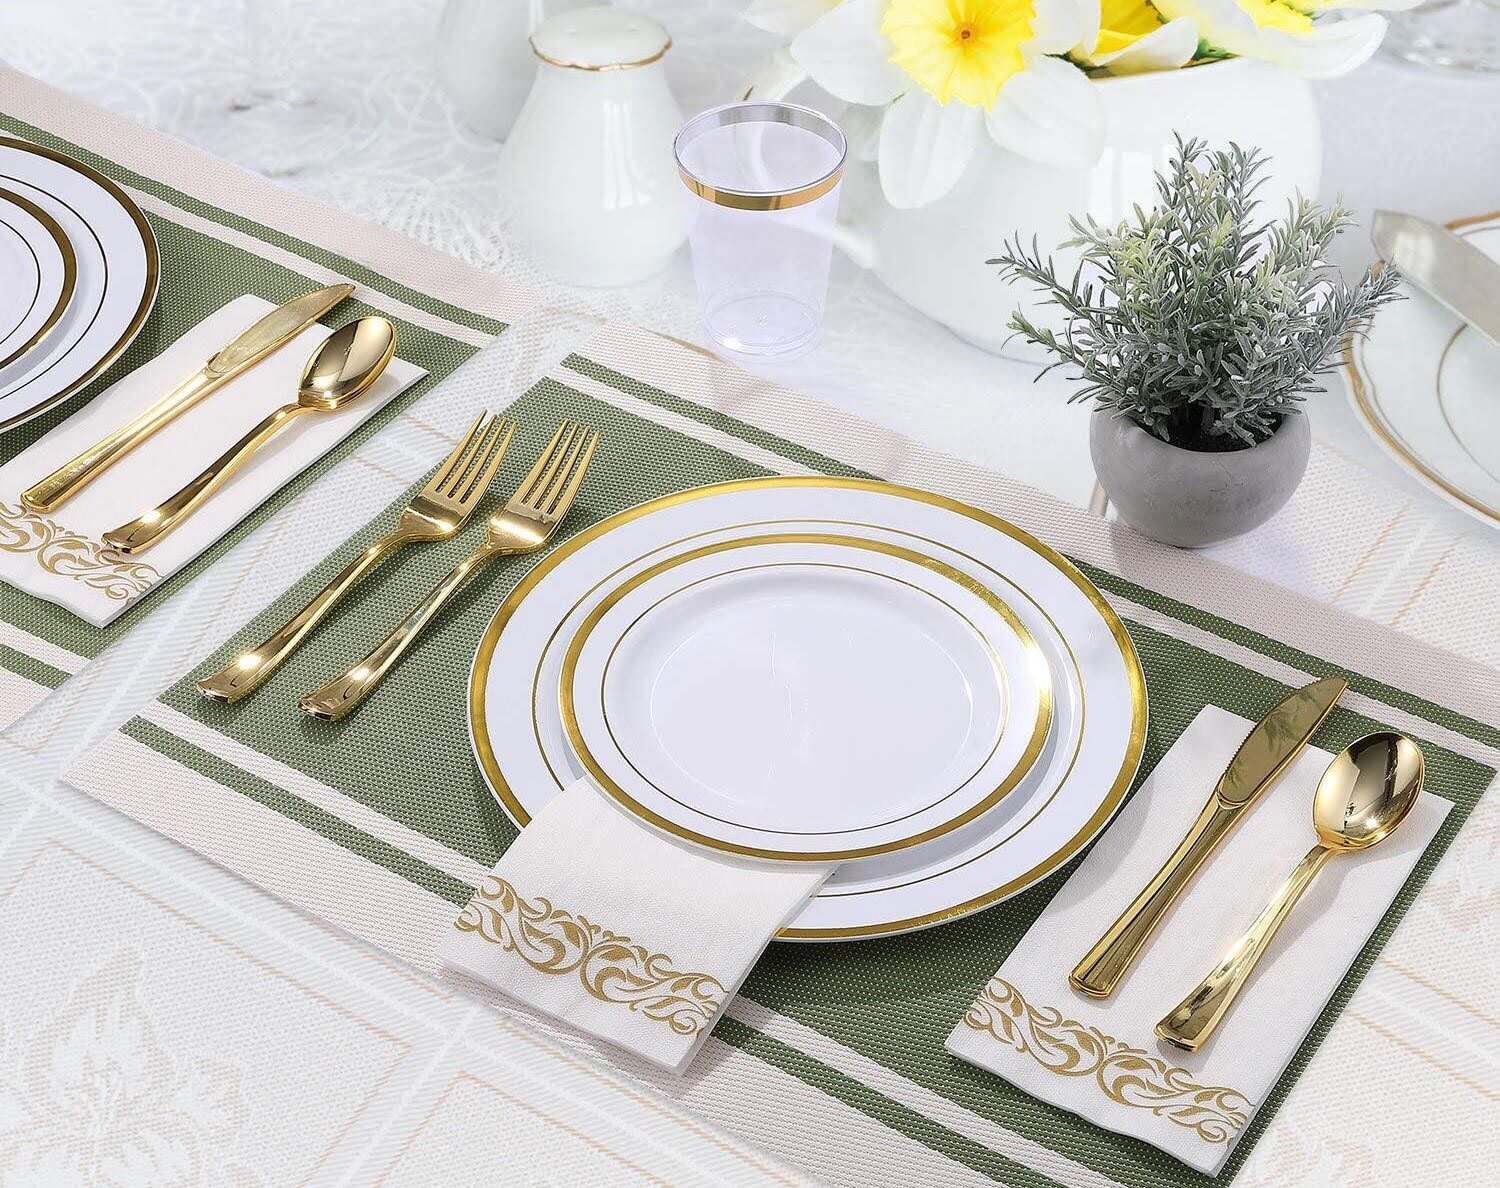 How Much Tableware Do You Need For 50 Guests?